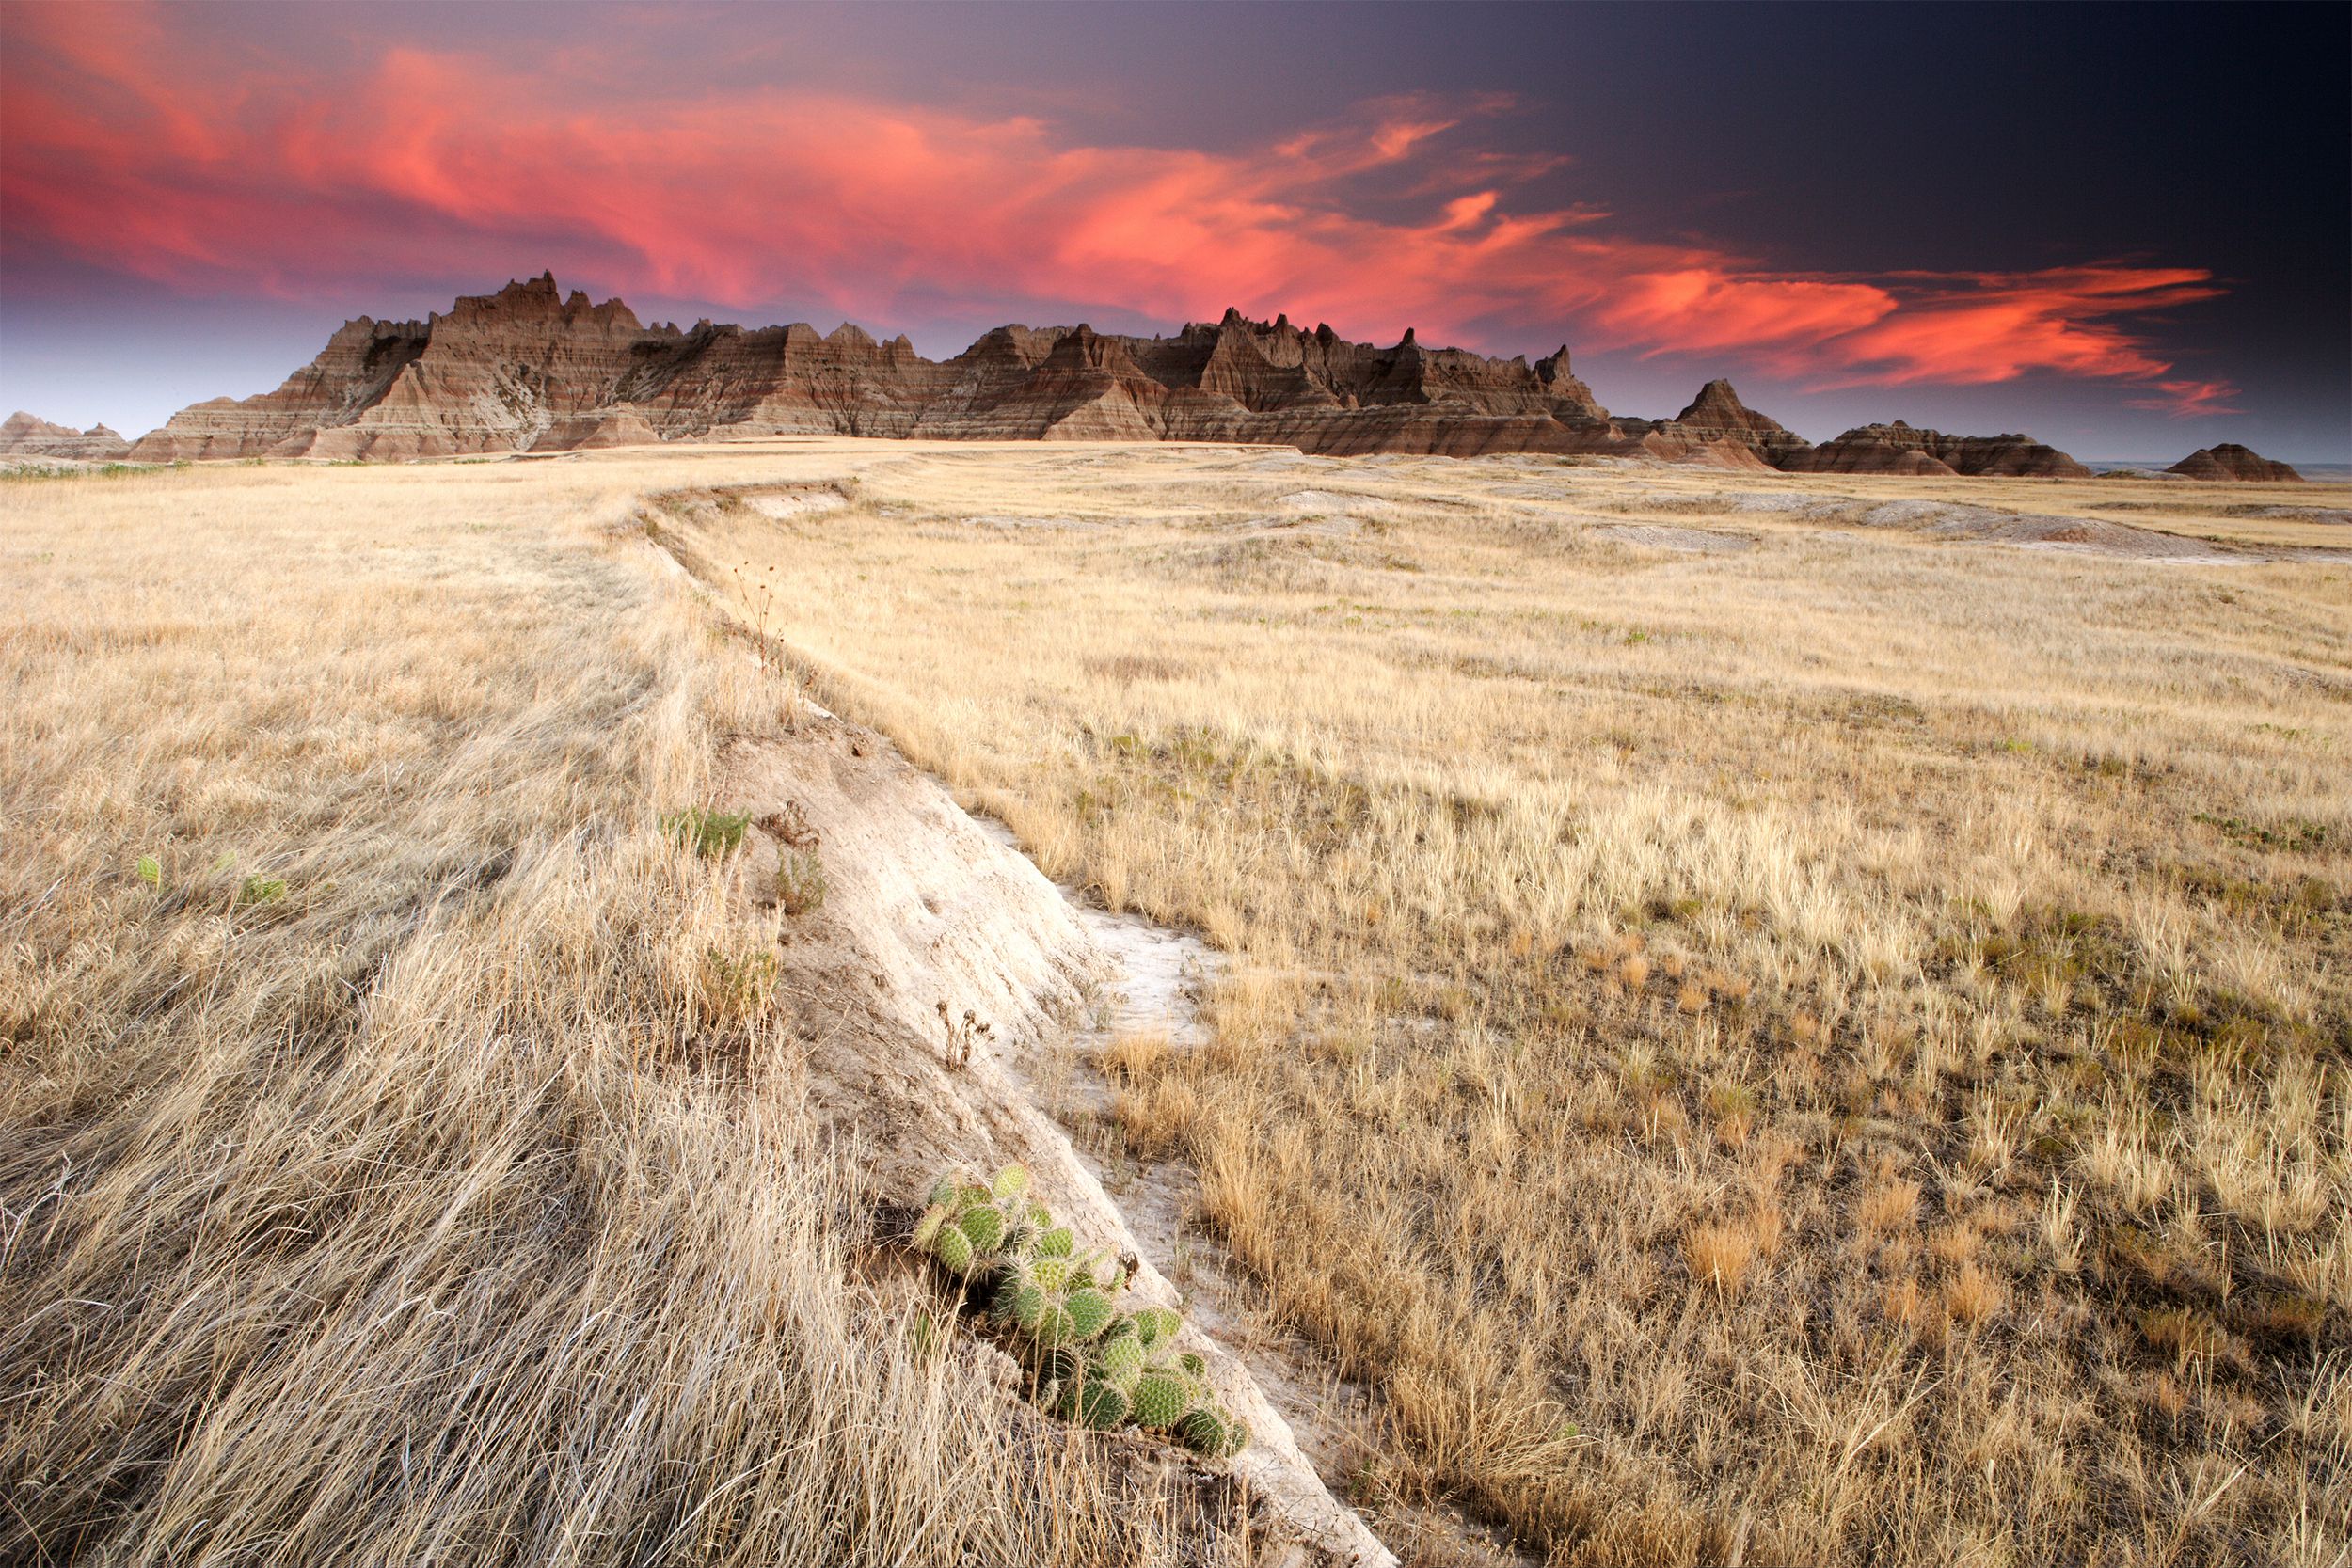 <p>A place that contains some of the world's richest fossil beds, <a href="https://www.nps.gov/badl/index.htm">Badlands National Park</a> is known for its 244,000 acres of rugged and colorful beauty dominated by mixed-grass prairies. Long ago, saber-toothed cats roamed here; today it's home to bison and bighorn sheep. </p><p><b>Related:</b> <a href="https://blog.cheapism.com/vintage-national-park-photos/">Historic National Park Photos for Vintage Views</a></p>